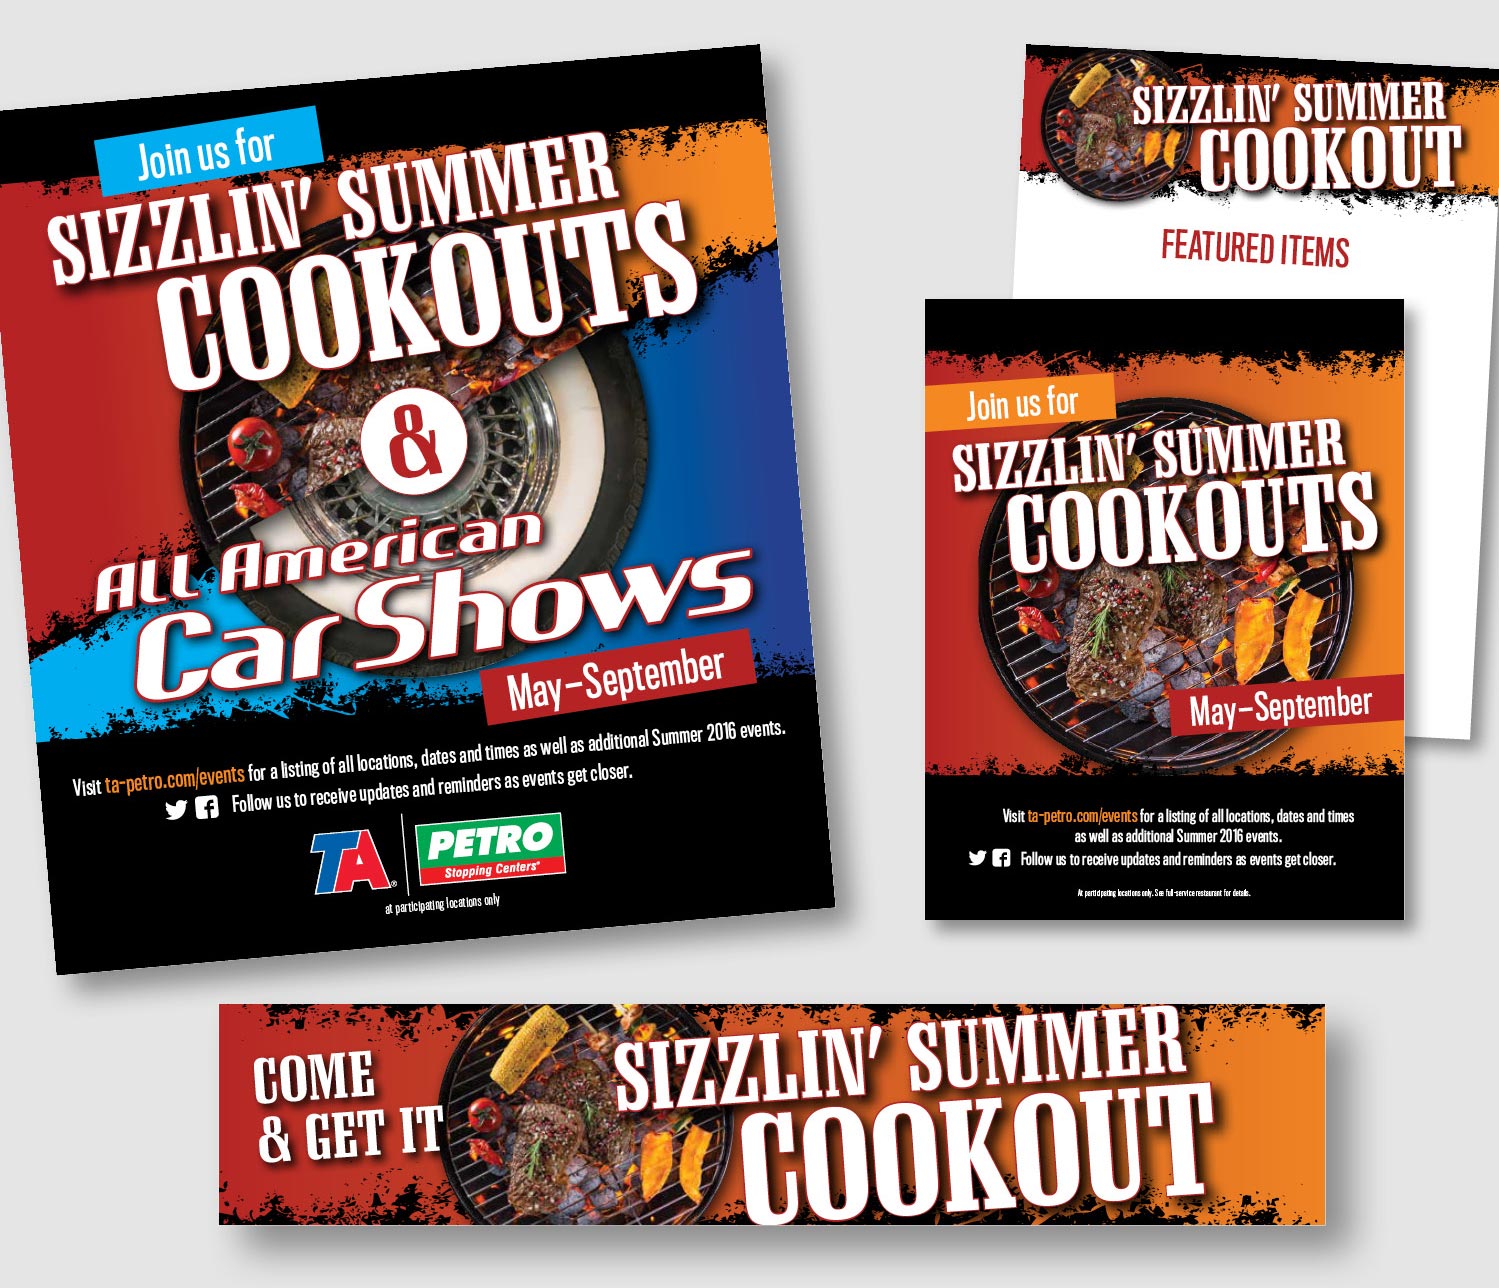  I created a campaign look for special summer events held and Travel Centers of America locations. The pieces are colorful yet call attention to the headlines and important dates or contact information. Campaign pieces included ads, flyers, banners, 